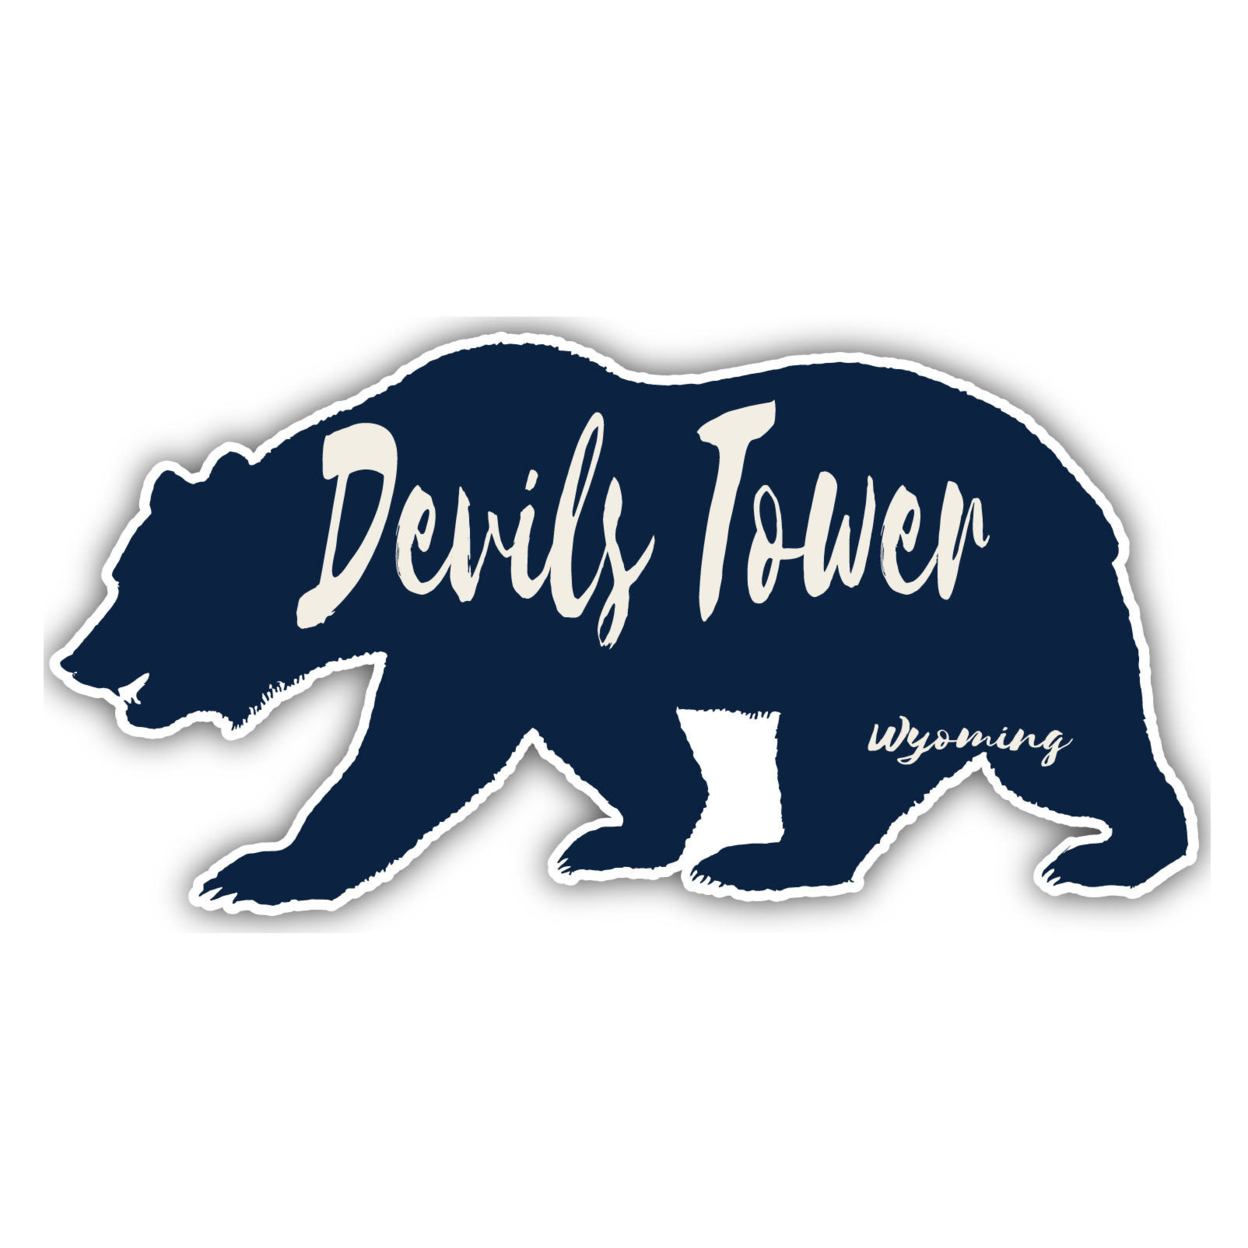 Devils Tower Wyoming Souvenir Decorative Stickers (Choose Theme And Size) - 4-Pack, 12-Inch, Adventures Awaits